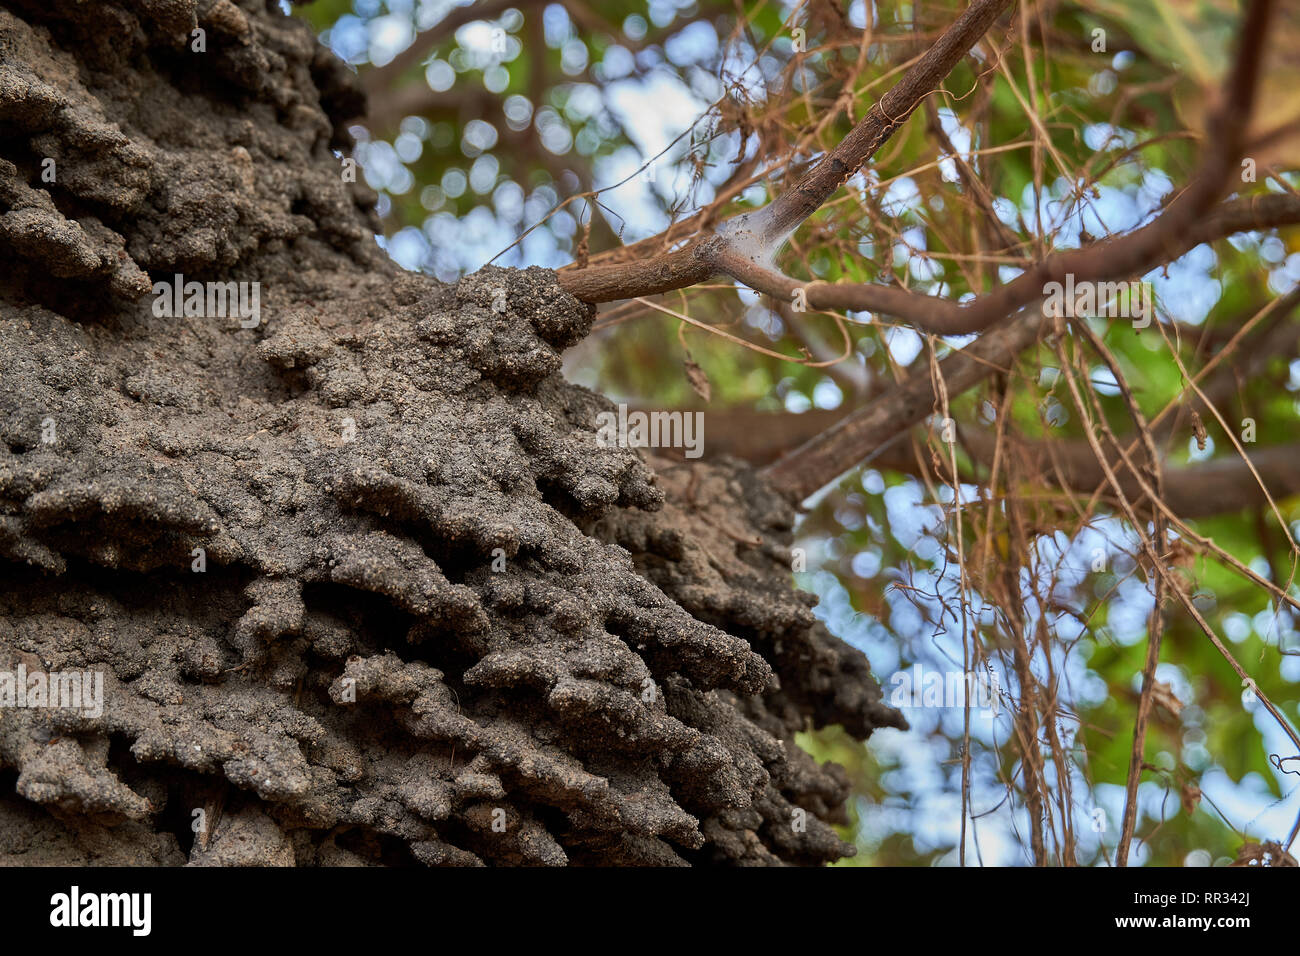 Close up of an arboreal airel dwelling termite nest in a Cashew tree in the Rupununi Savannah of Guyana, S.A. Stock Photo